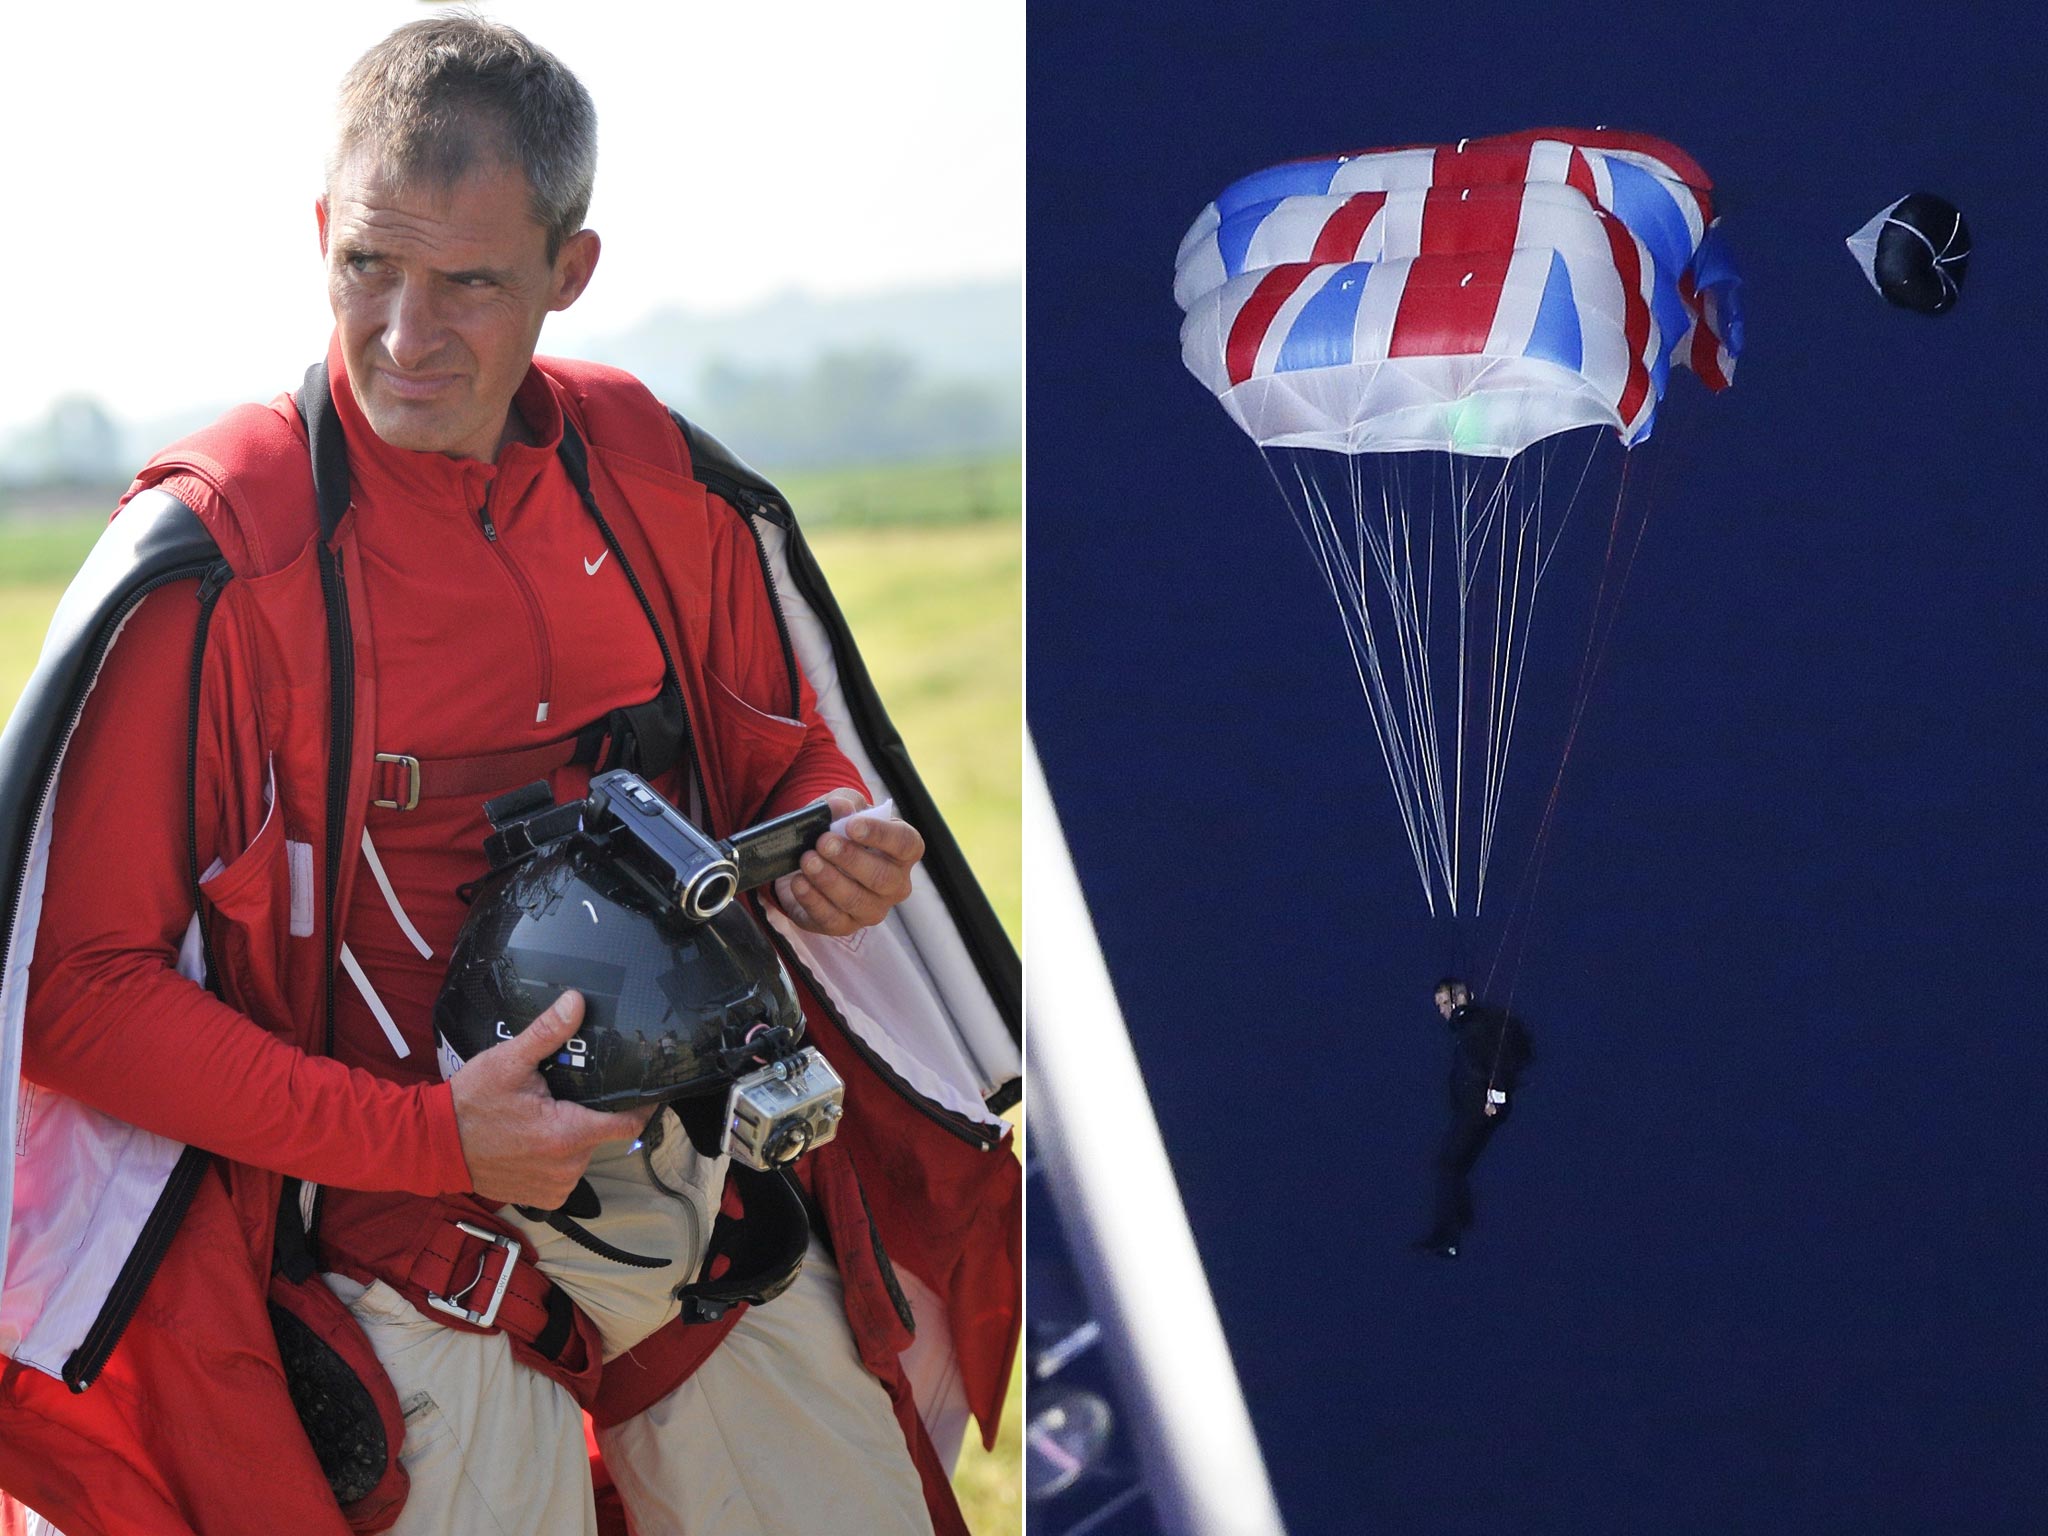 Stuntman Mark Sutton and parachuting at the Olympics opening ceremony